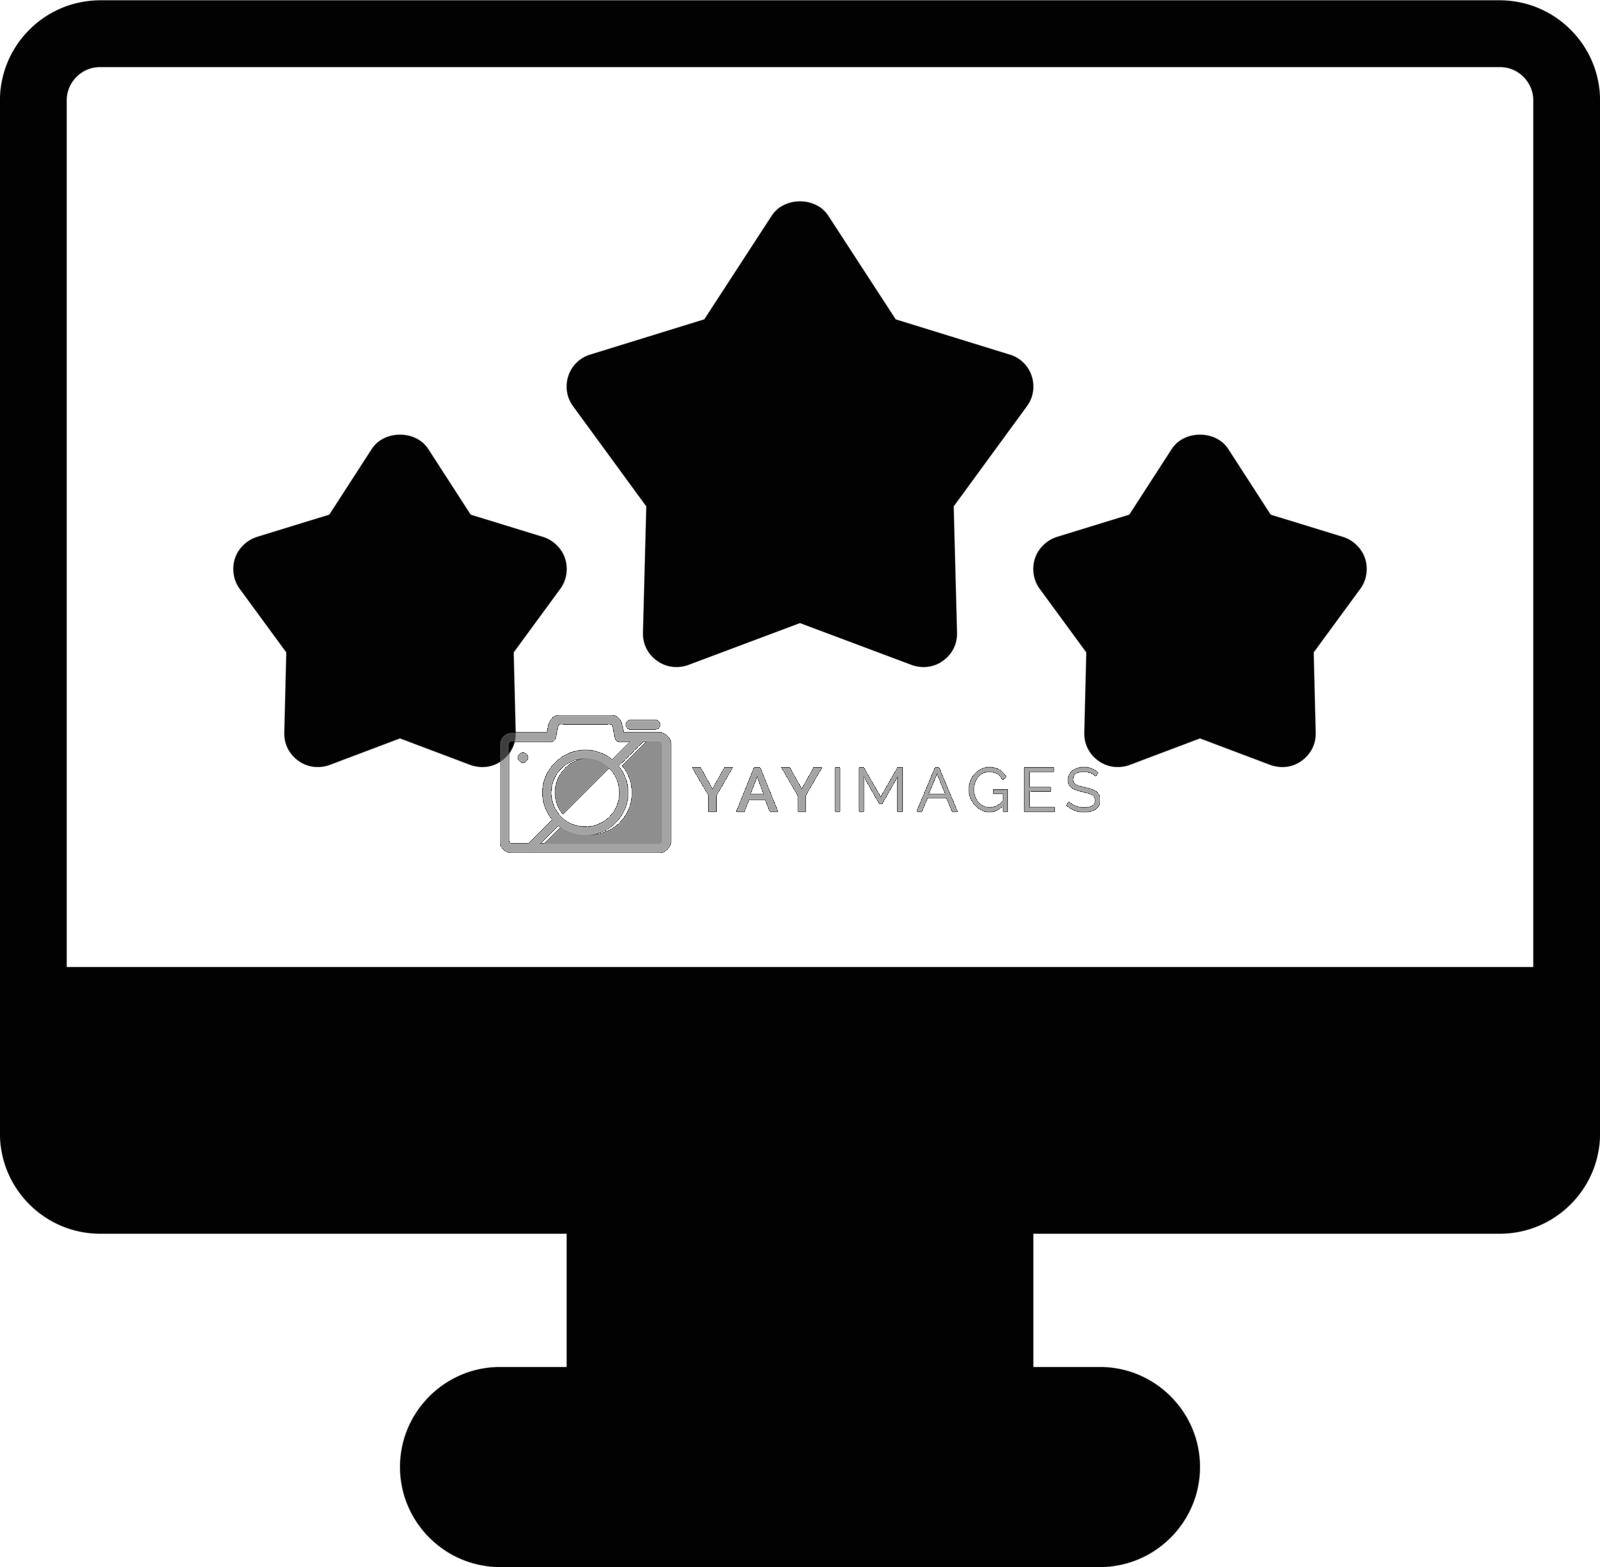 Royalty free image of star by FlaticonsDesign